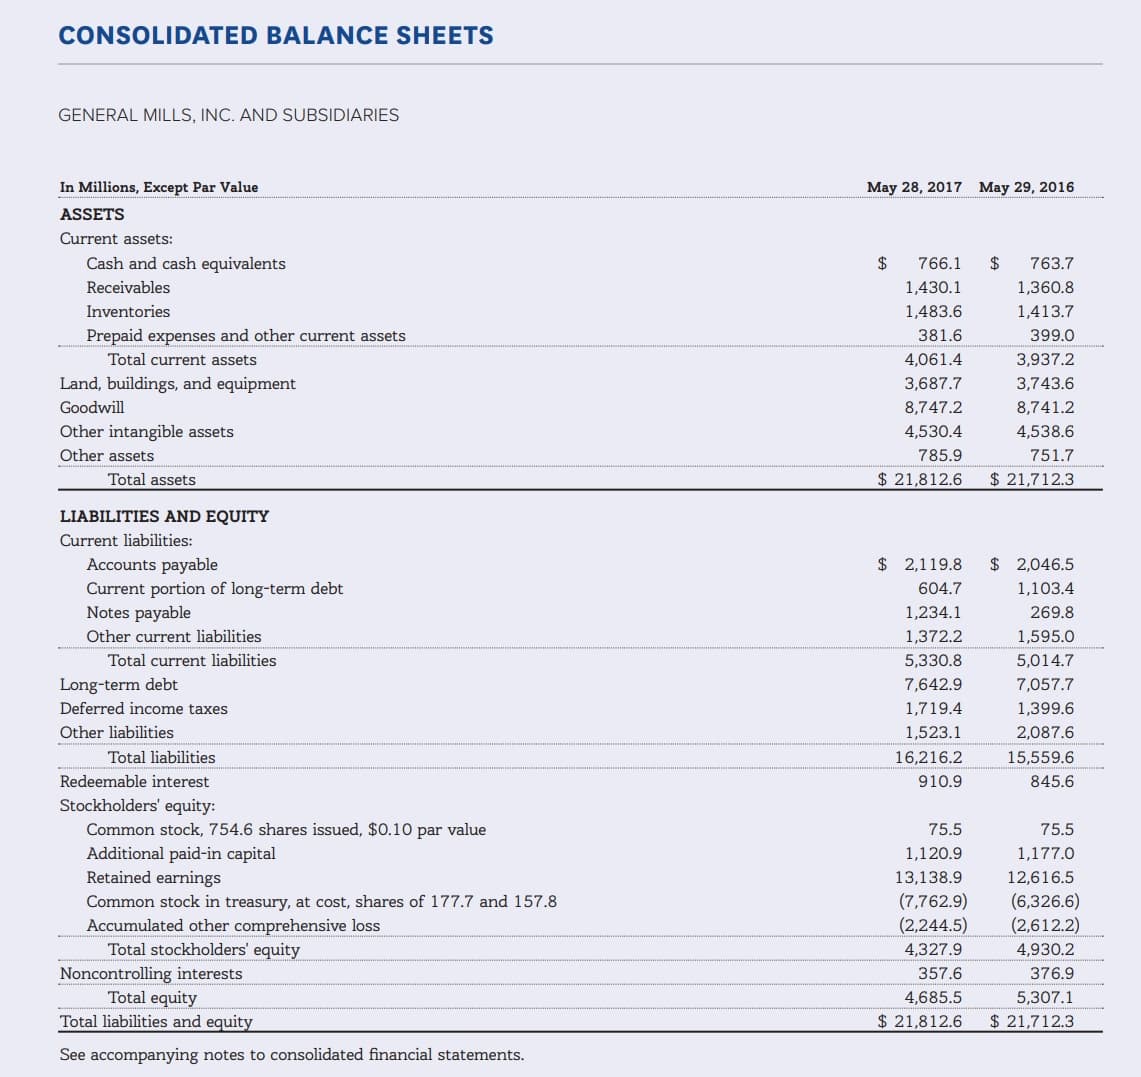 CONSOLIDATED BALANCE SHEETS
GENERAL MILLS, INC. AND SUBSIDIARIES
In Millions, Except Par Value
May 29, 2016
May 28, 2017
ASSETS
Current assets:
Cash and cash equivalents
$
763.7
1,360.8
$
766.1
Receivables
1,430.1
Inventories
1,483.6
1,413.7
Prepaid expenses and other current assets
381.6
399.0
Total current assets
4,061.4
3,937.2
Land, buildings, and equipment
3,687.7
3,743.6
8,741.2
Goodwill
8,747.2
Other intangible assets
4,530.4
4,538.6
Other assets
785.9
751.7
Total assets
$ 21,812.6
$ 21,712.3
LIABILITIES AND EQUITY
Current liabilities:
Accounts payable
$ 2,119.8
2,046.5
Current portion of long-term debt
Notes payable
604.7
1,103.4
1,234.1
269.8
Other current liabilities
1,372.2
1,595.0
5,014.7
Total current liabilities
5,330.8
Long-term debt
7,642.9
7,057.7
Deferred income taxes
1,719.4
1,399.6
Other liabilities
1,523.1
2,087.6
Total liabilities
16,216.2
15,559.6
Redeemable interest
910.9
845.6
Stockholders' equity:
Common stock, 754.6 shares issued, $0.10 par value
Additional paid-in capital
Retained earnings
75.5
75.5
1,120.9
1,177.0
13,138.9
12,616.5
(7,762.9)
(2,244.5)
(6,326.6)
(2,612.2)
Common stock in treasury, at cost, shares of 177.7 and 157.8
Accumulated other comprehensive loss
Total stockholders' equity
4,327.9
4,930.2
Noncontrolling interests
Total equity
Total liabilities and equity
357.6
376.9
5,307.1
4,685.5
$ 21,712.3
$21,812.6
See accompanying notes to consolidated financial statements.
